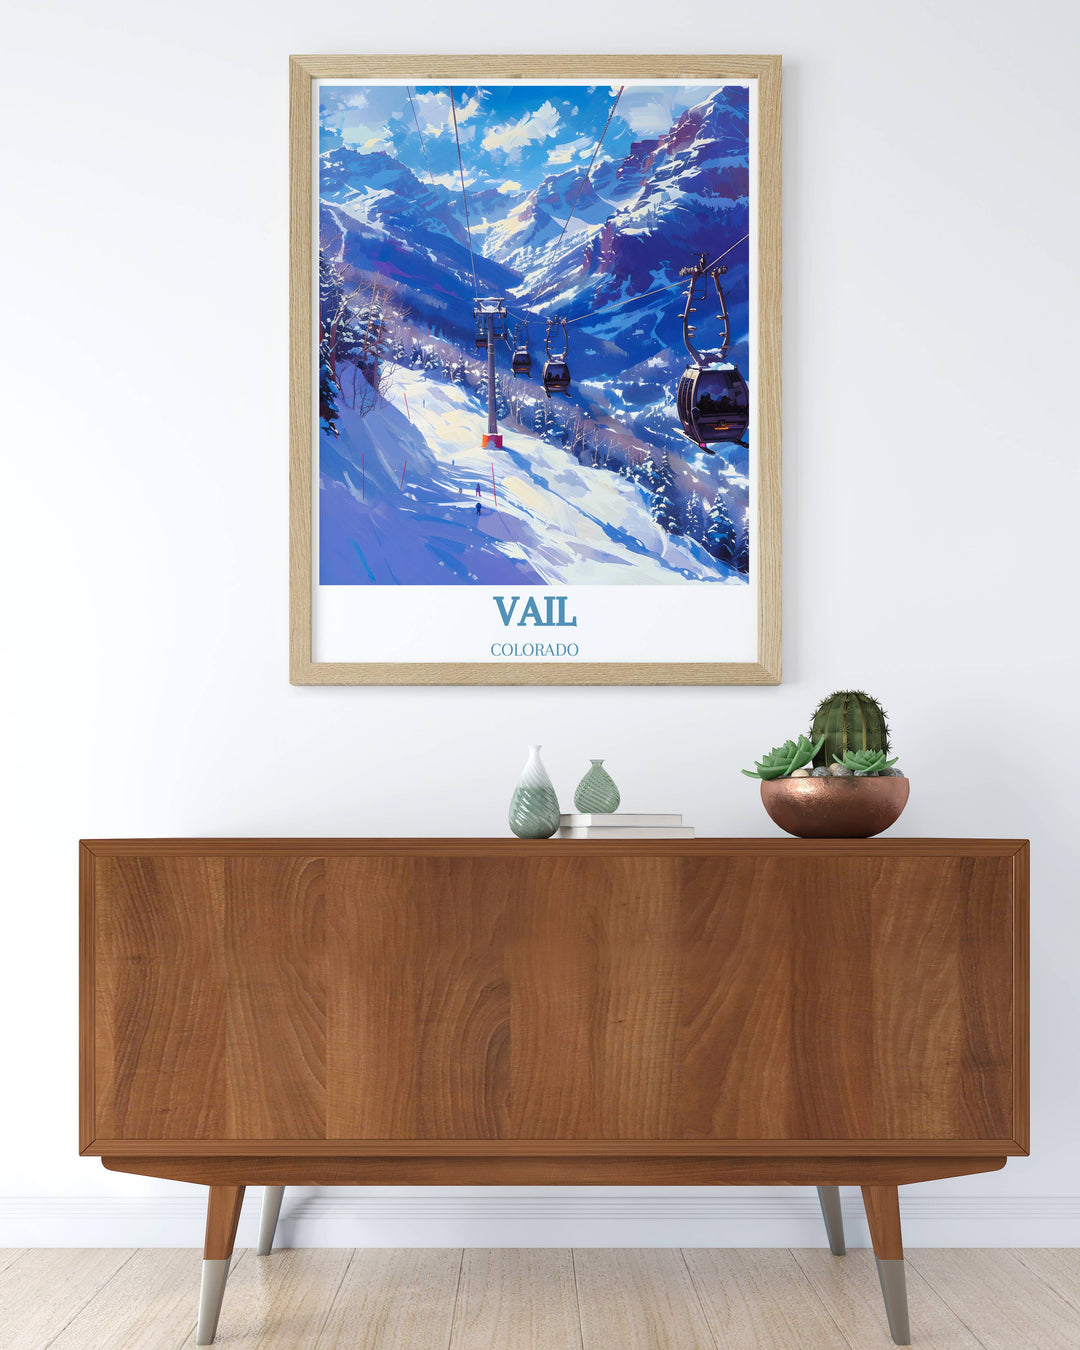 Vintage Vail Ski Resort poster with retro styling and vibrant colors, evoking nostalgia for classic travel posters. Ideal for adding historical charm to your home or office.